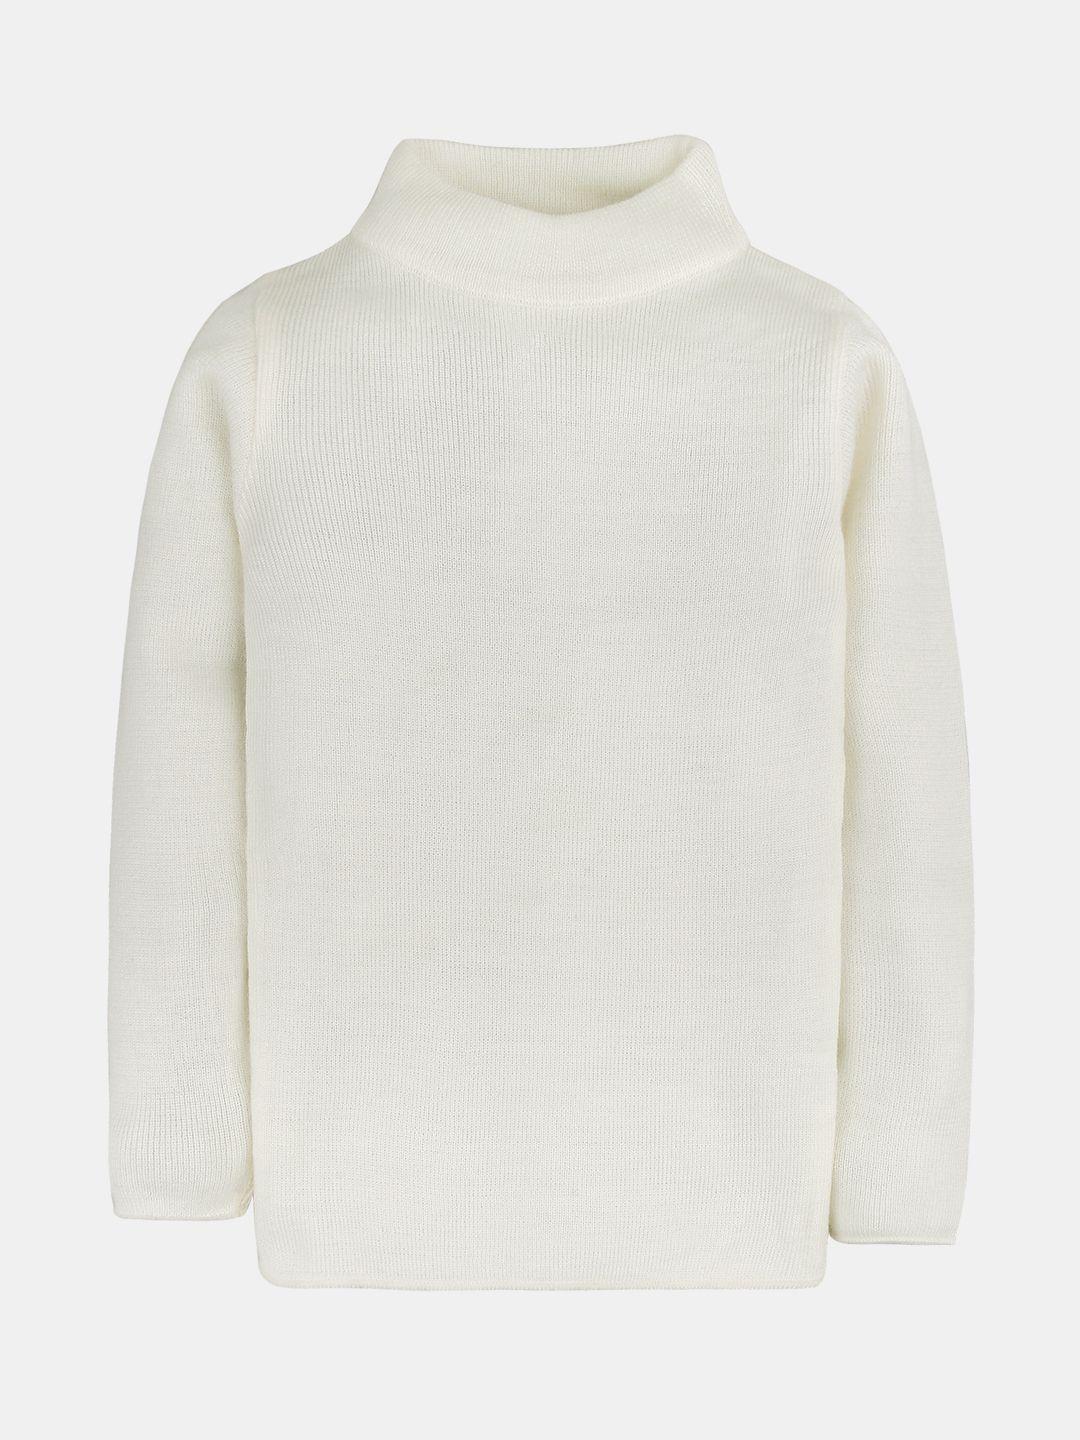 rvk-kids-off-white-solid-sweater